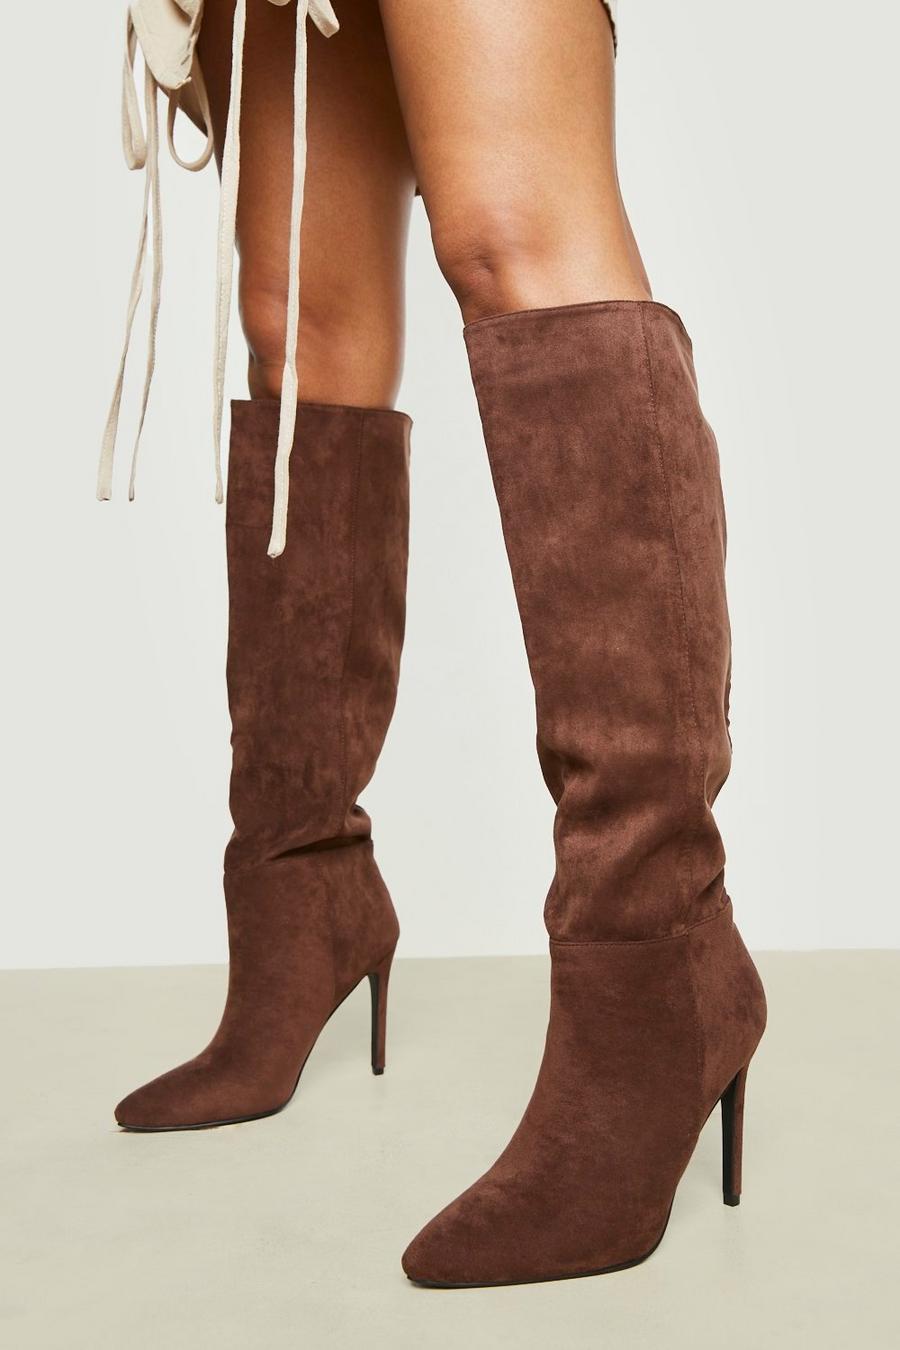 Chocolate marrón Pointed Knee High Stiletto Heeled Boots